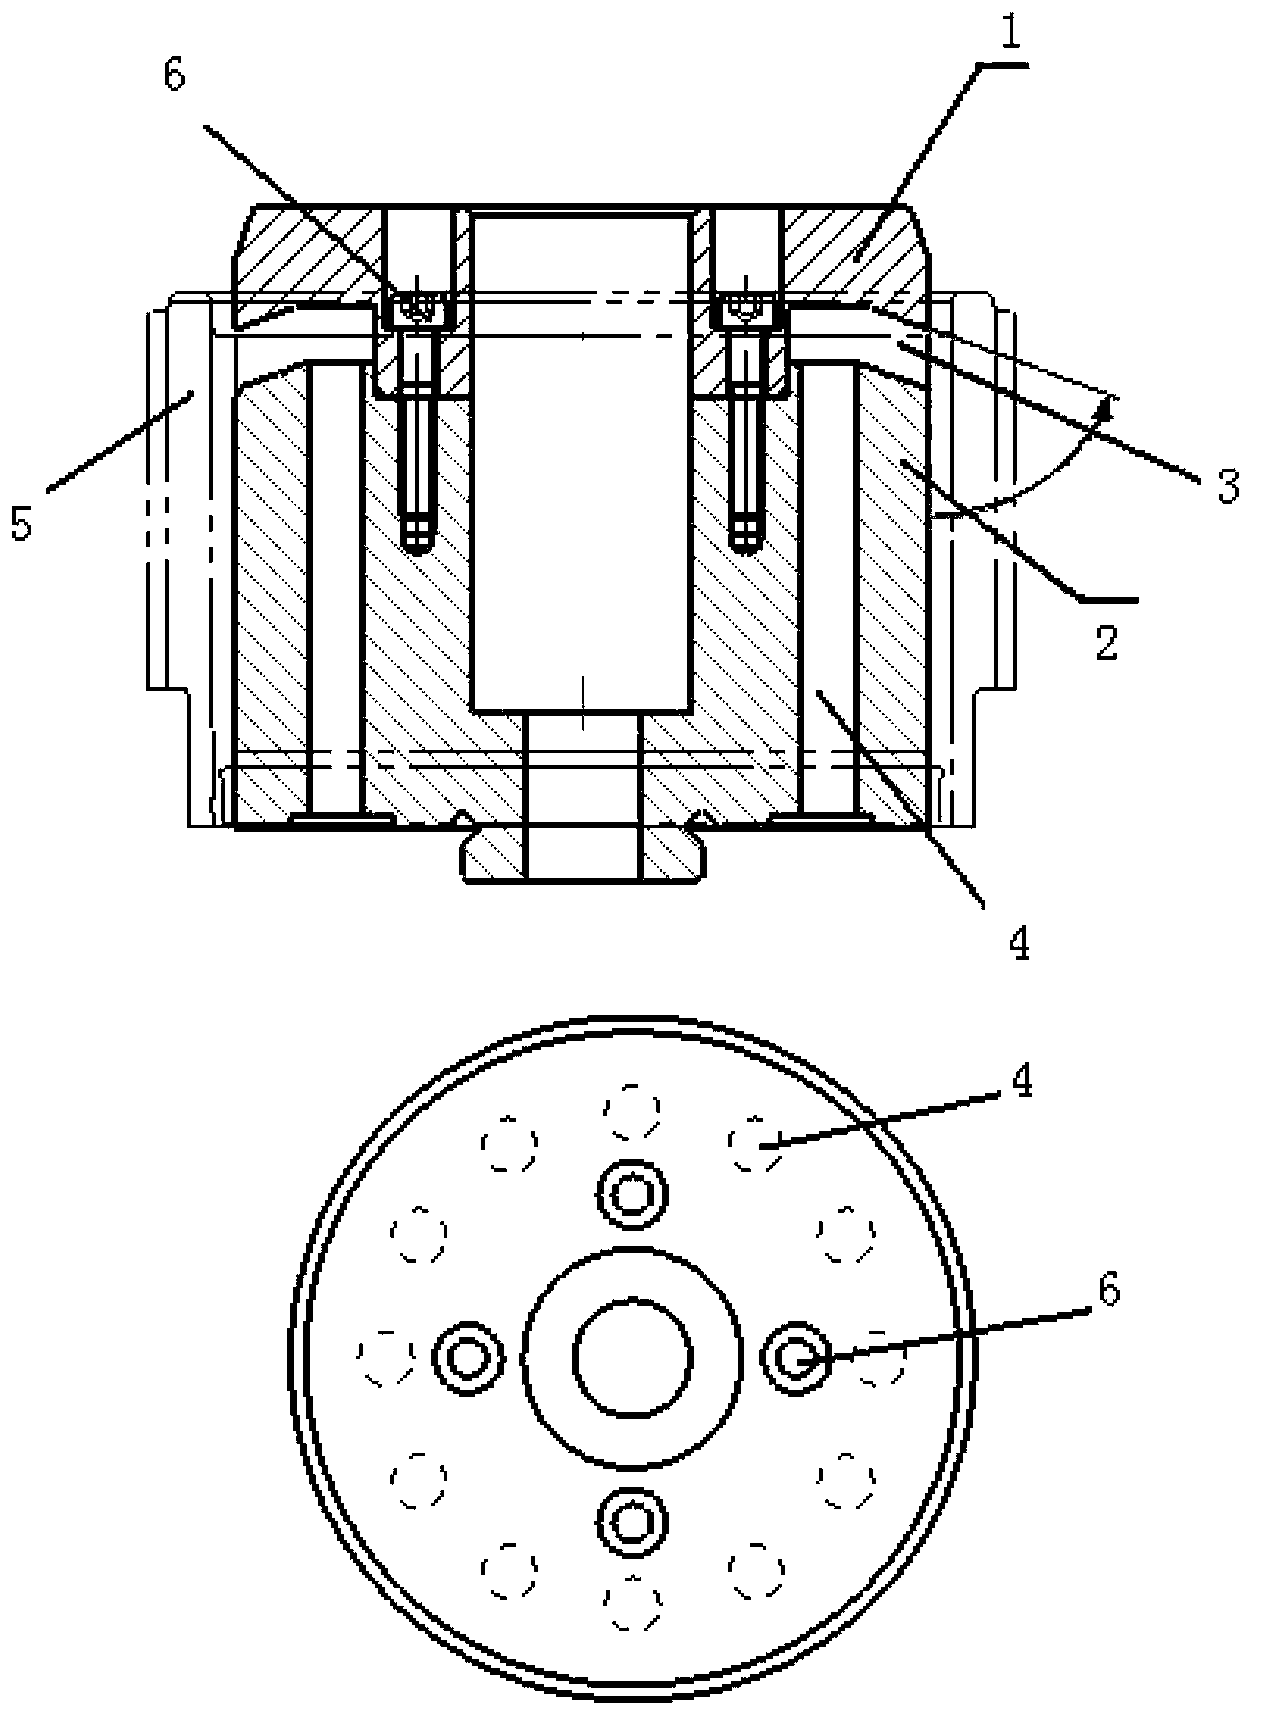 Combined pressure quenching mandrel